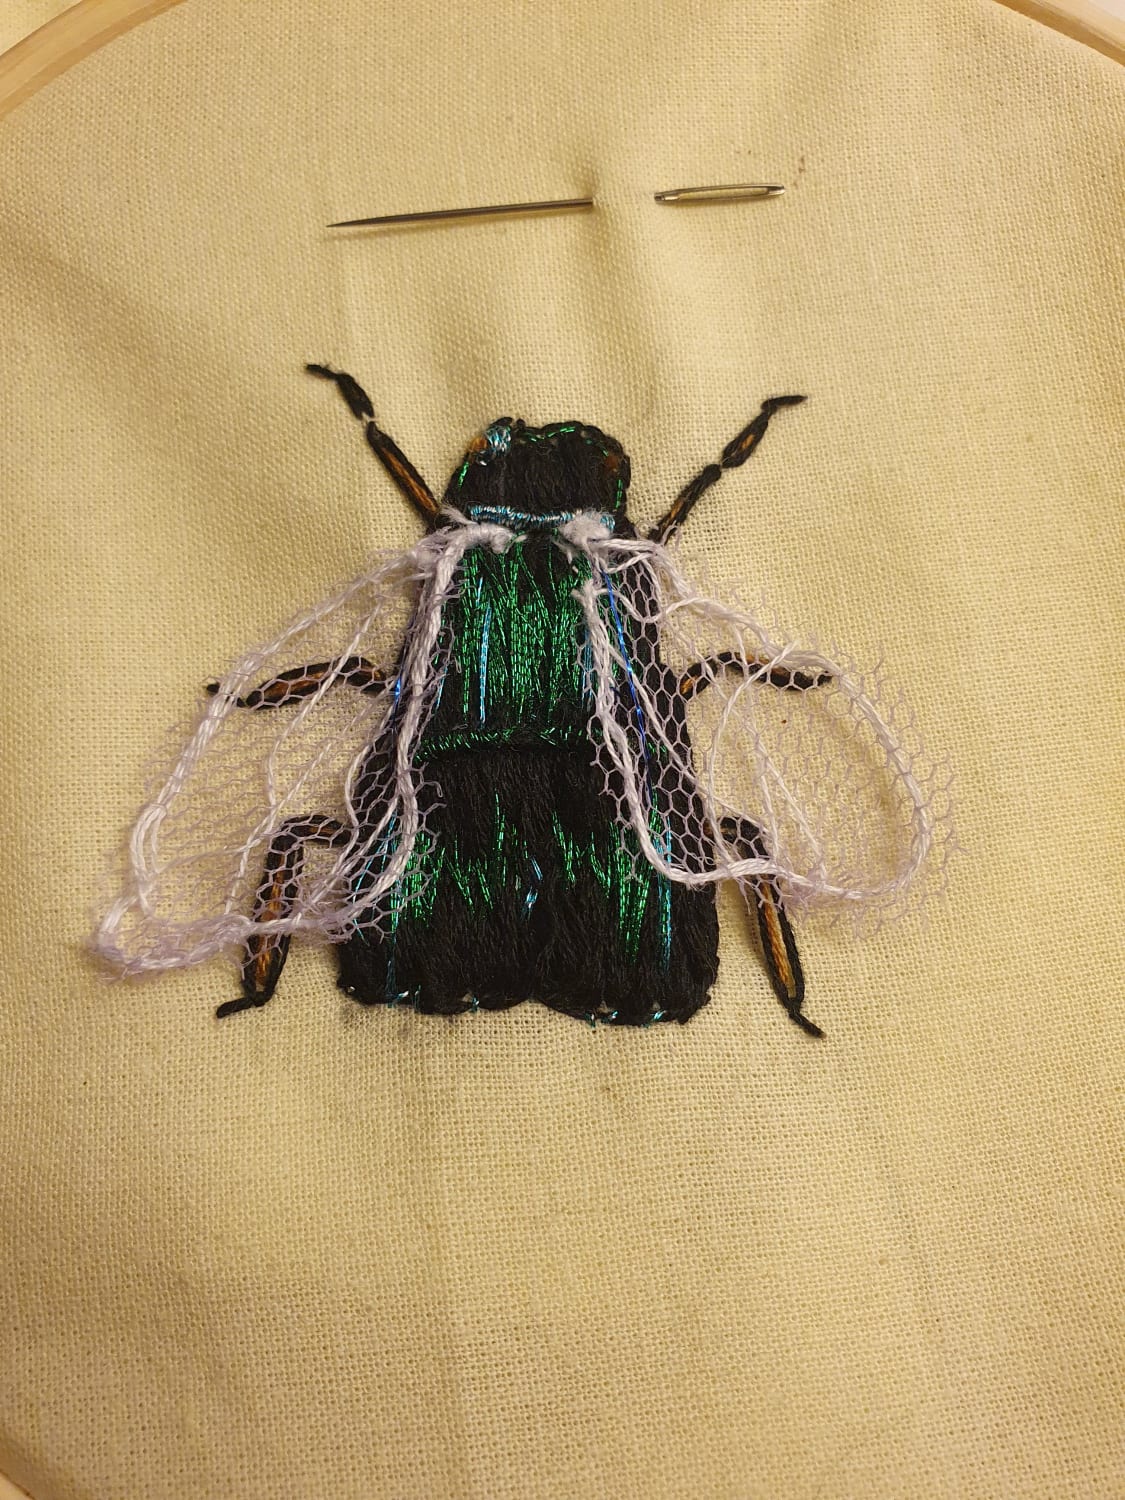 Hello. I'm out of my comfort zone showin my first attempt to sew a fly. I am a rookie in the broidery world and a I'm loving it